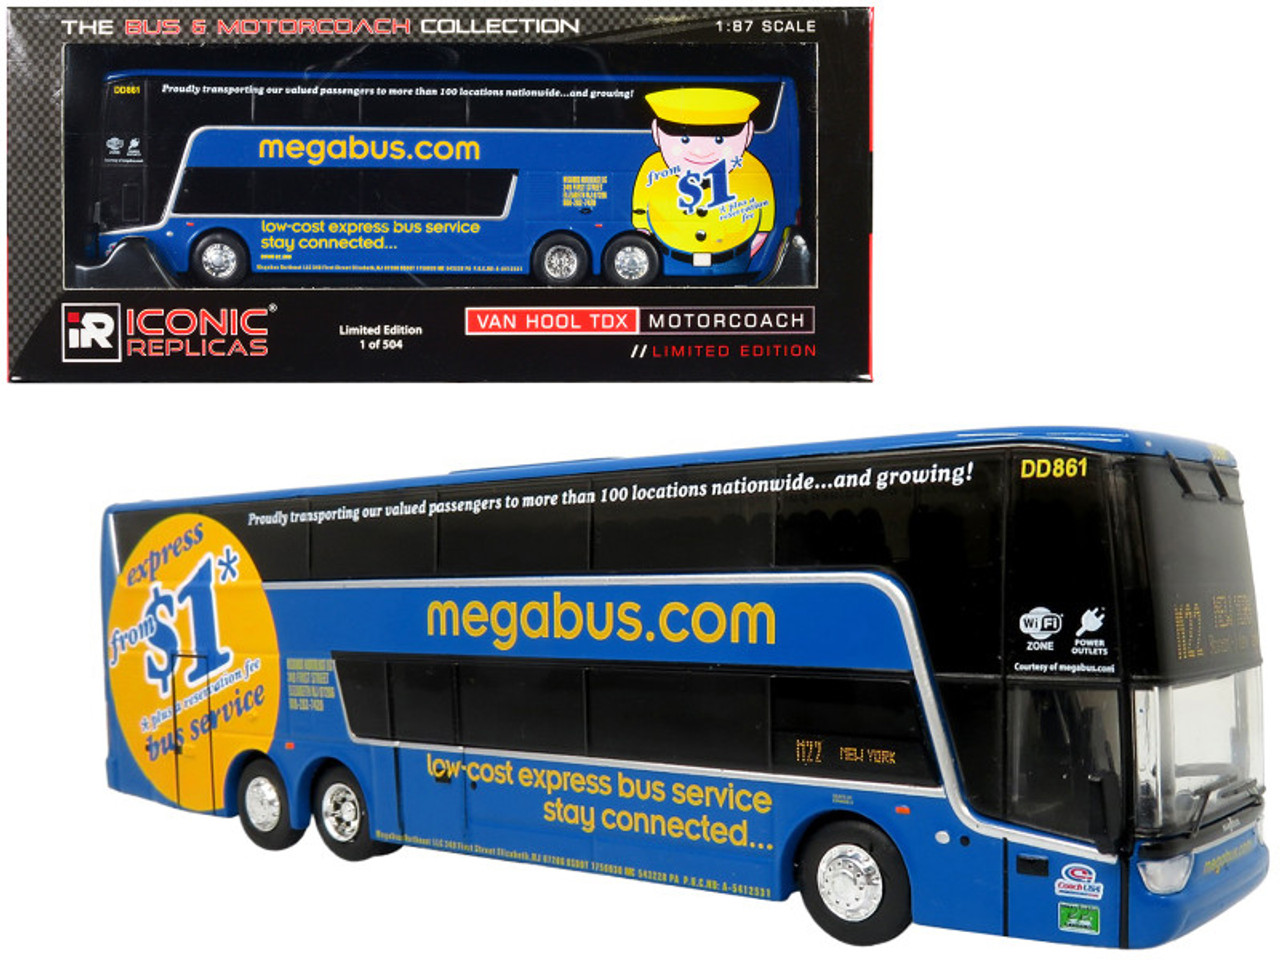 Van Hool TDX Double Decker Coach Bus "Megabus" "M22 Boston to New York" "The Bus & Motorcoach Collection" Limited Edition to 504 pieces Worldwide 1/87 (HO) Diecast Model by Iconic Replicas